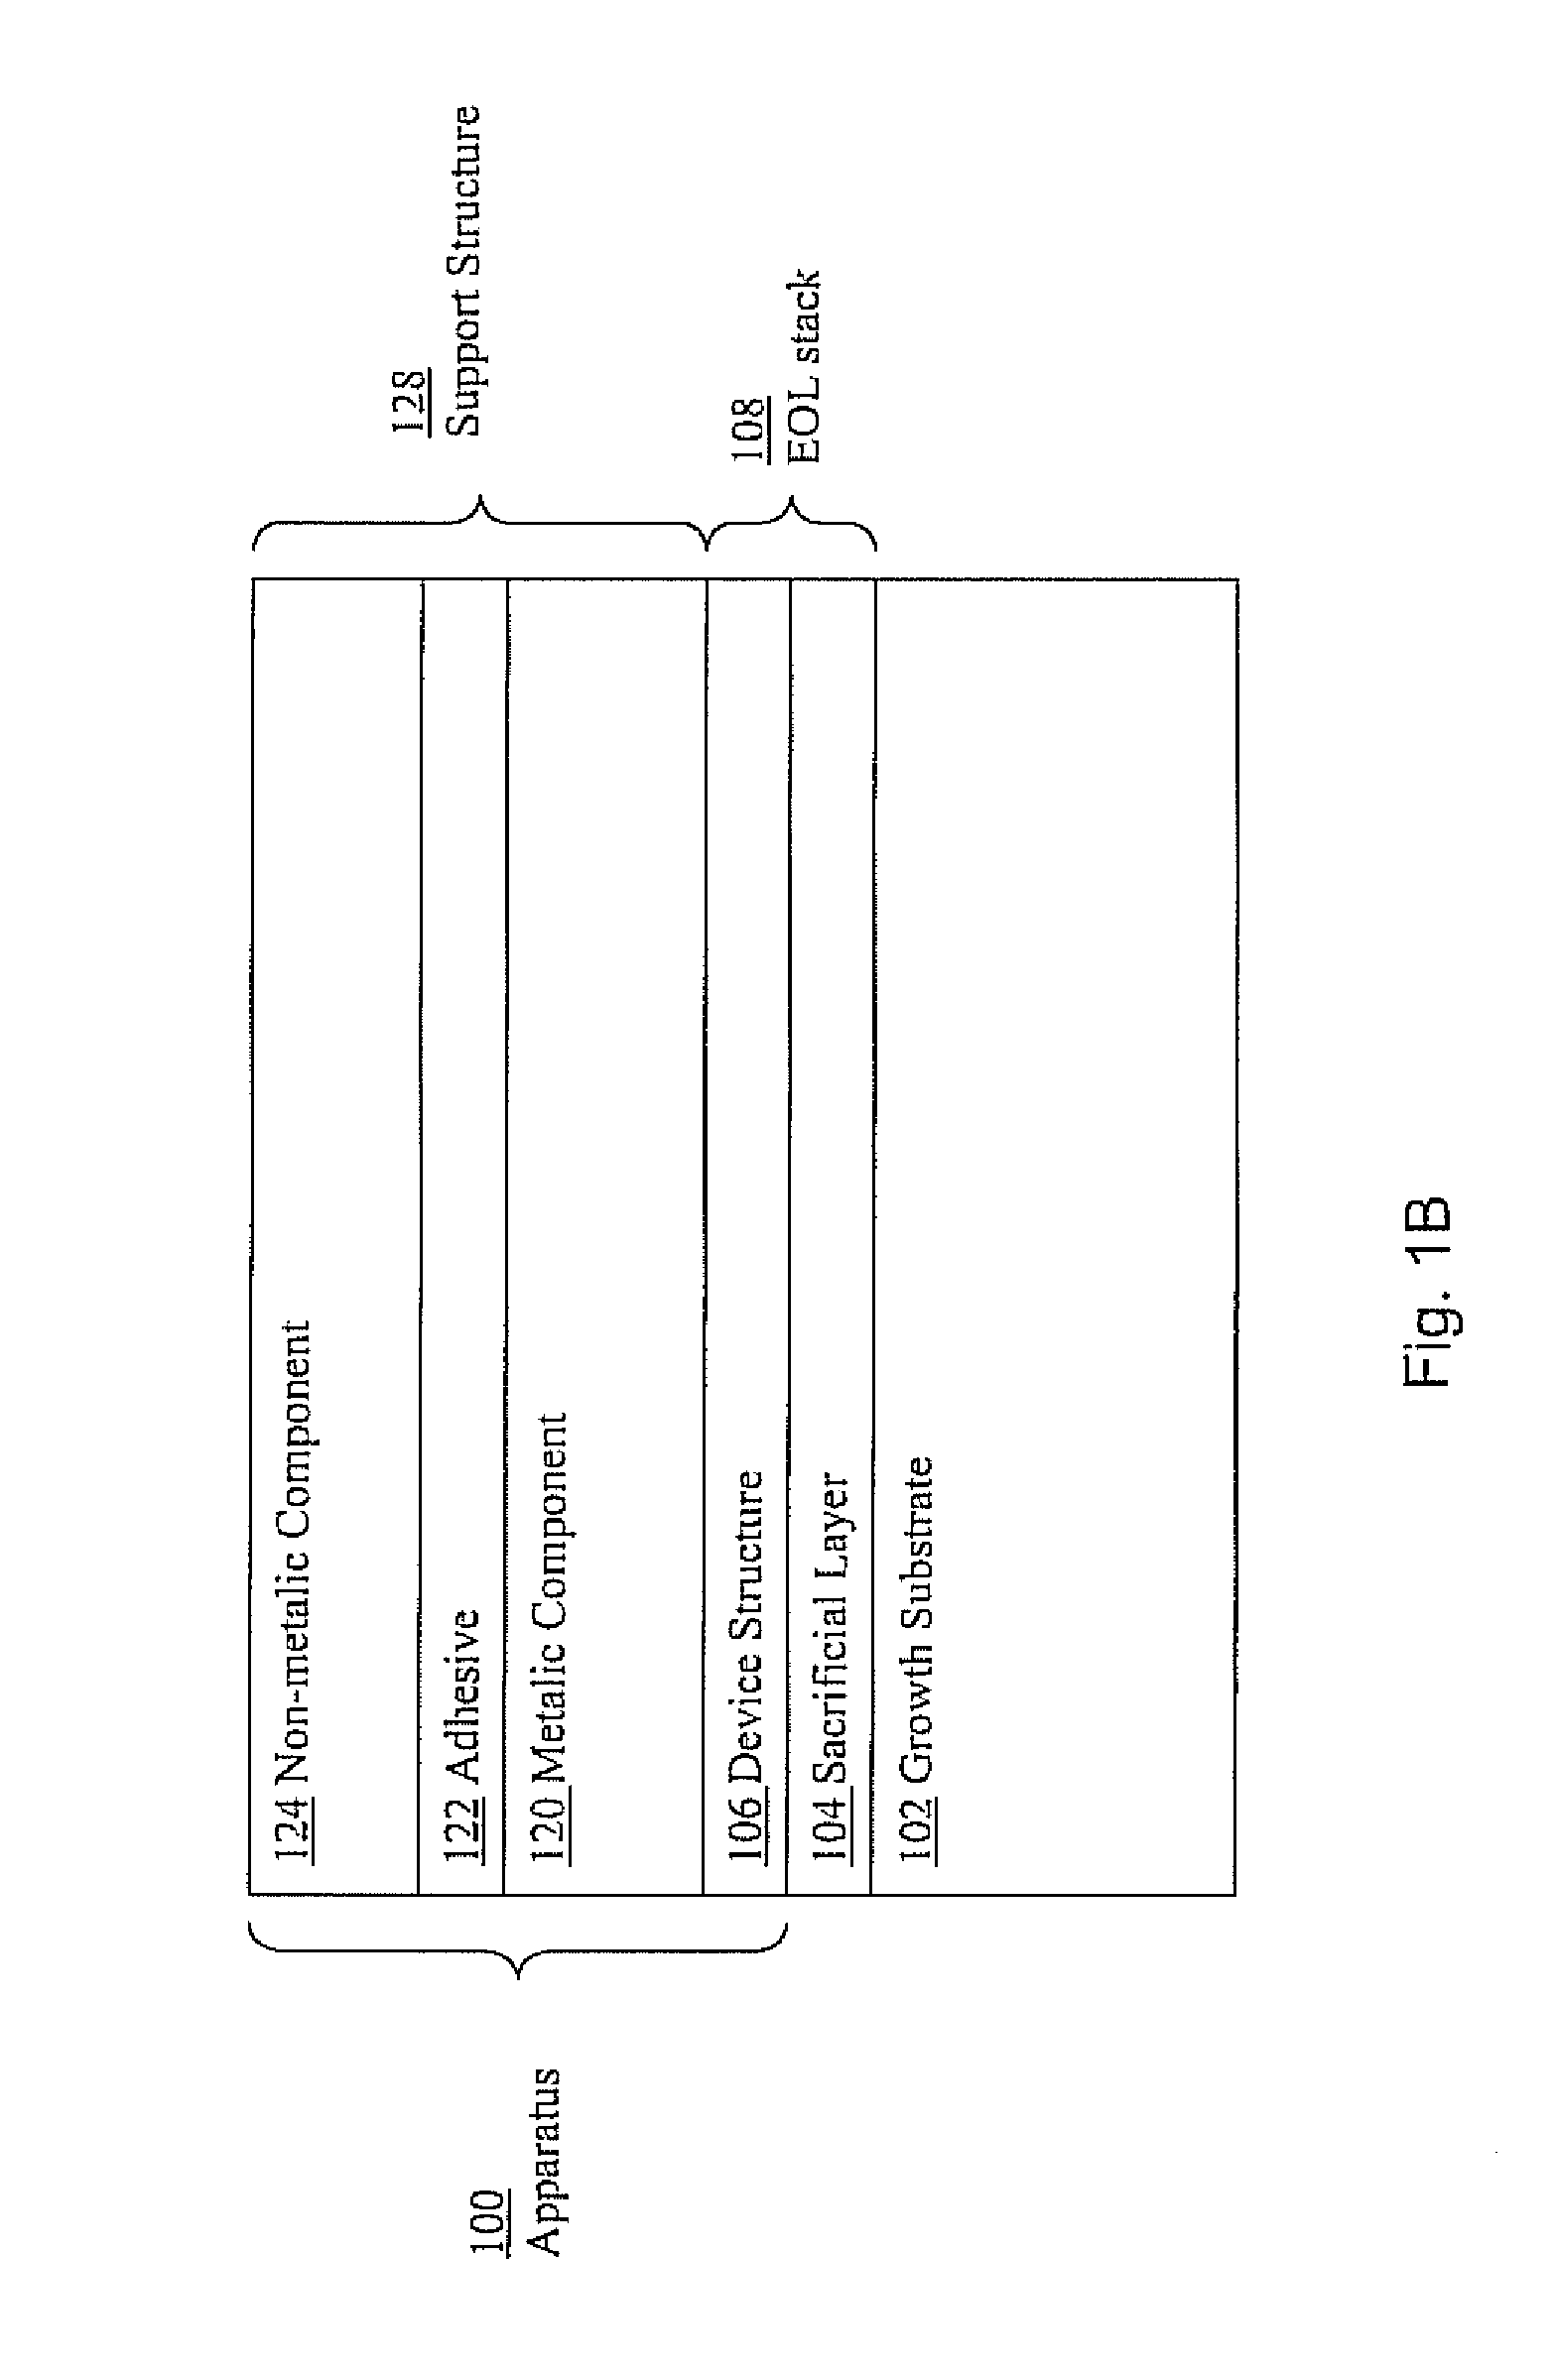 Support structures for various apparatuses including opto-electrical apparatuses